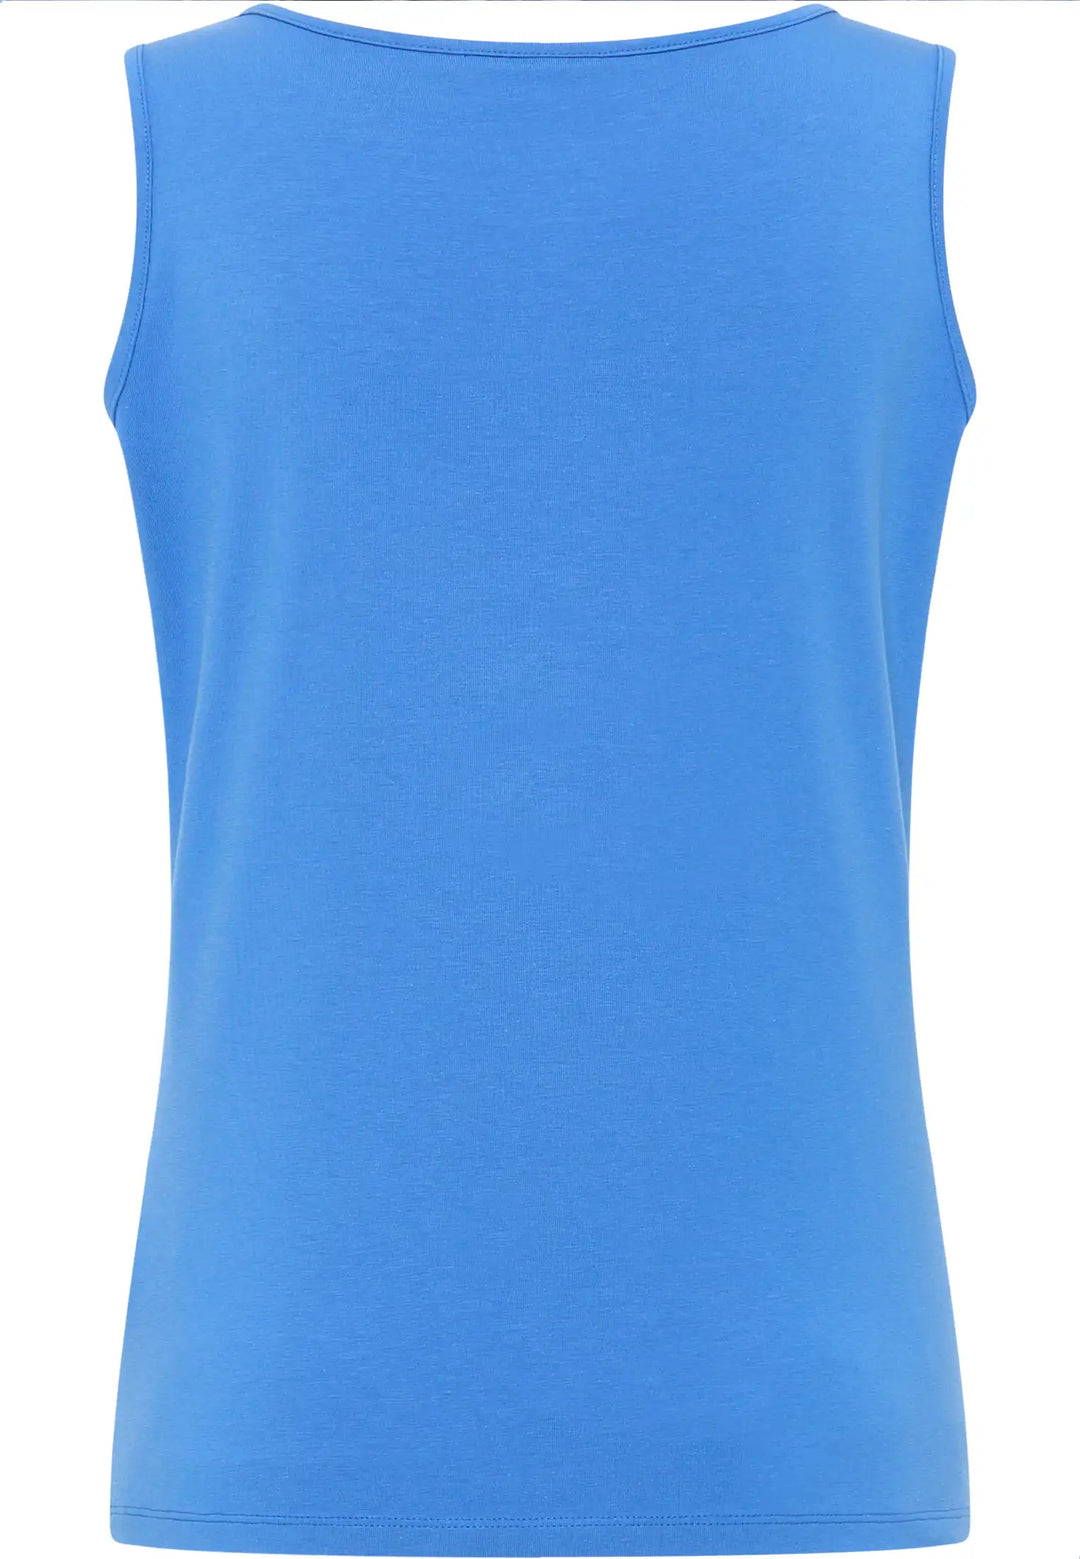 Back view of a sky blue sleeveless top with a smooth finish and a well-cut armhole for a comfortable and versatile fit, ideal for a minimalist and adaptable wardrobe staple, style 55120042-730.